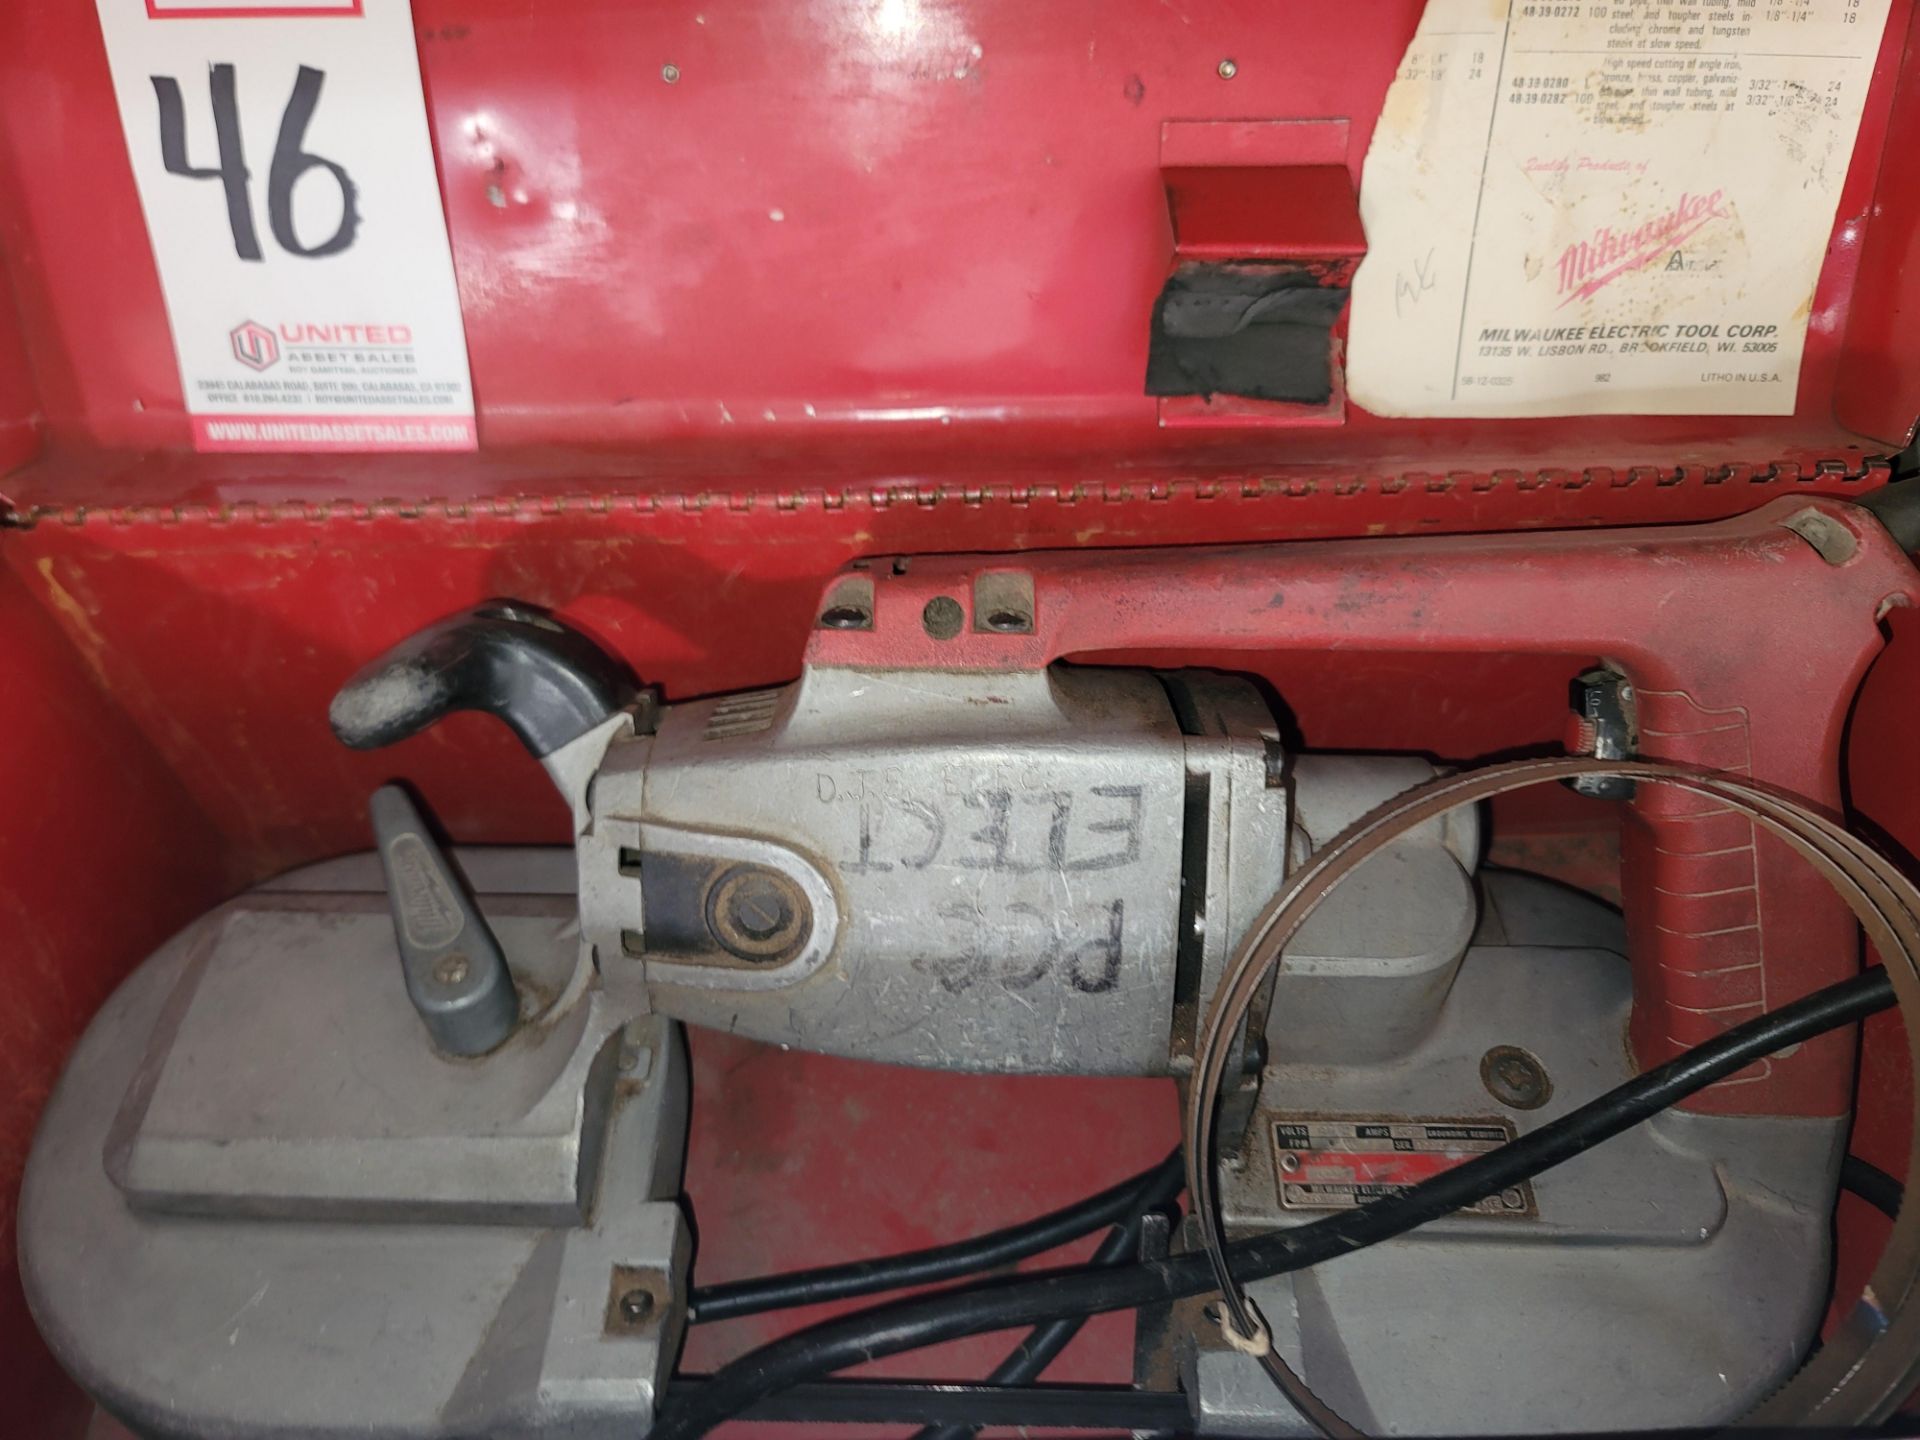 LOT - MILWAUKEE 6227 PORTABLE BAND SAW, 6 AMP, W/ CASE AND SPARE BLADES - Image 2 of 2